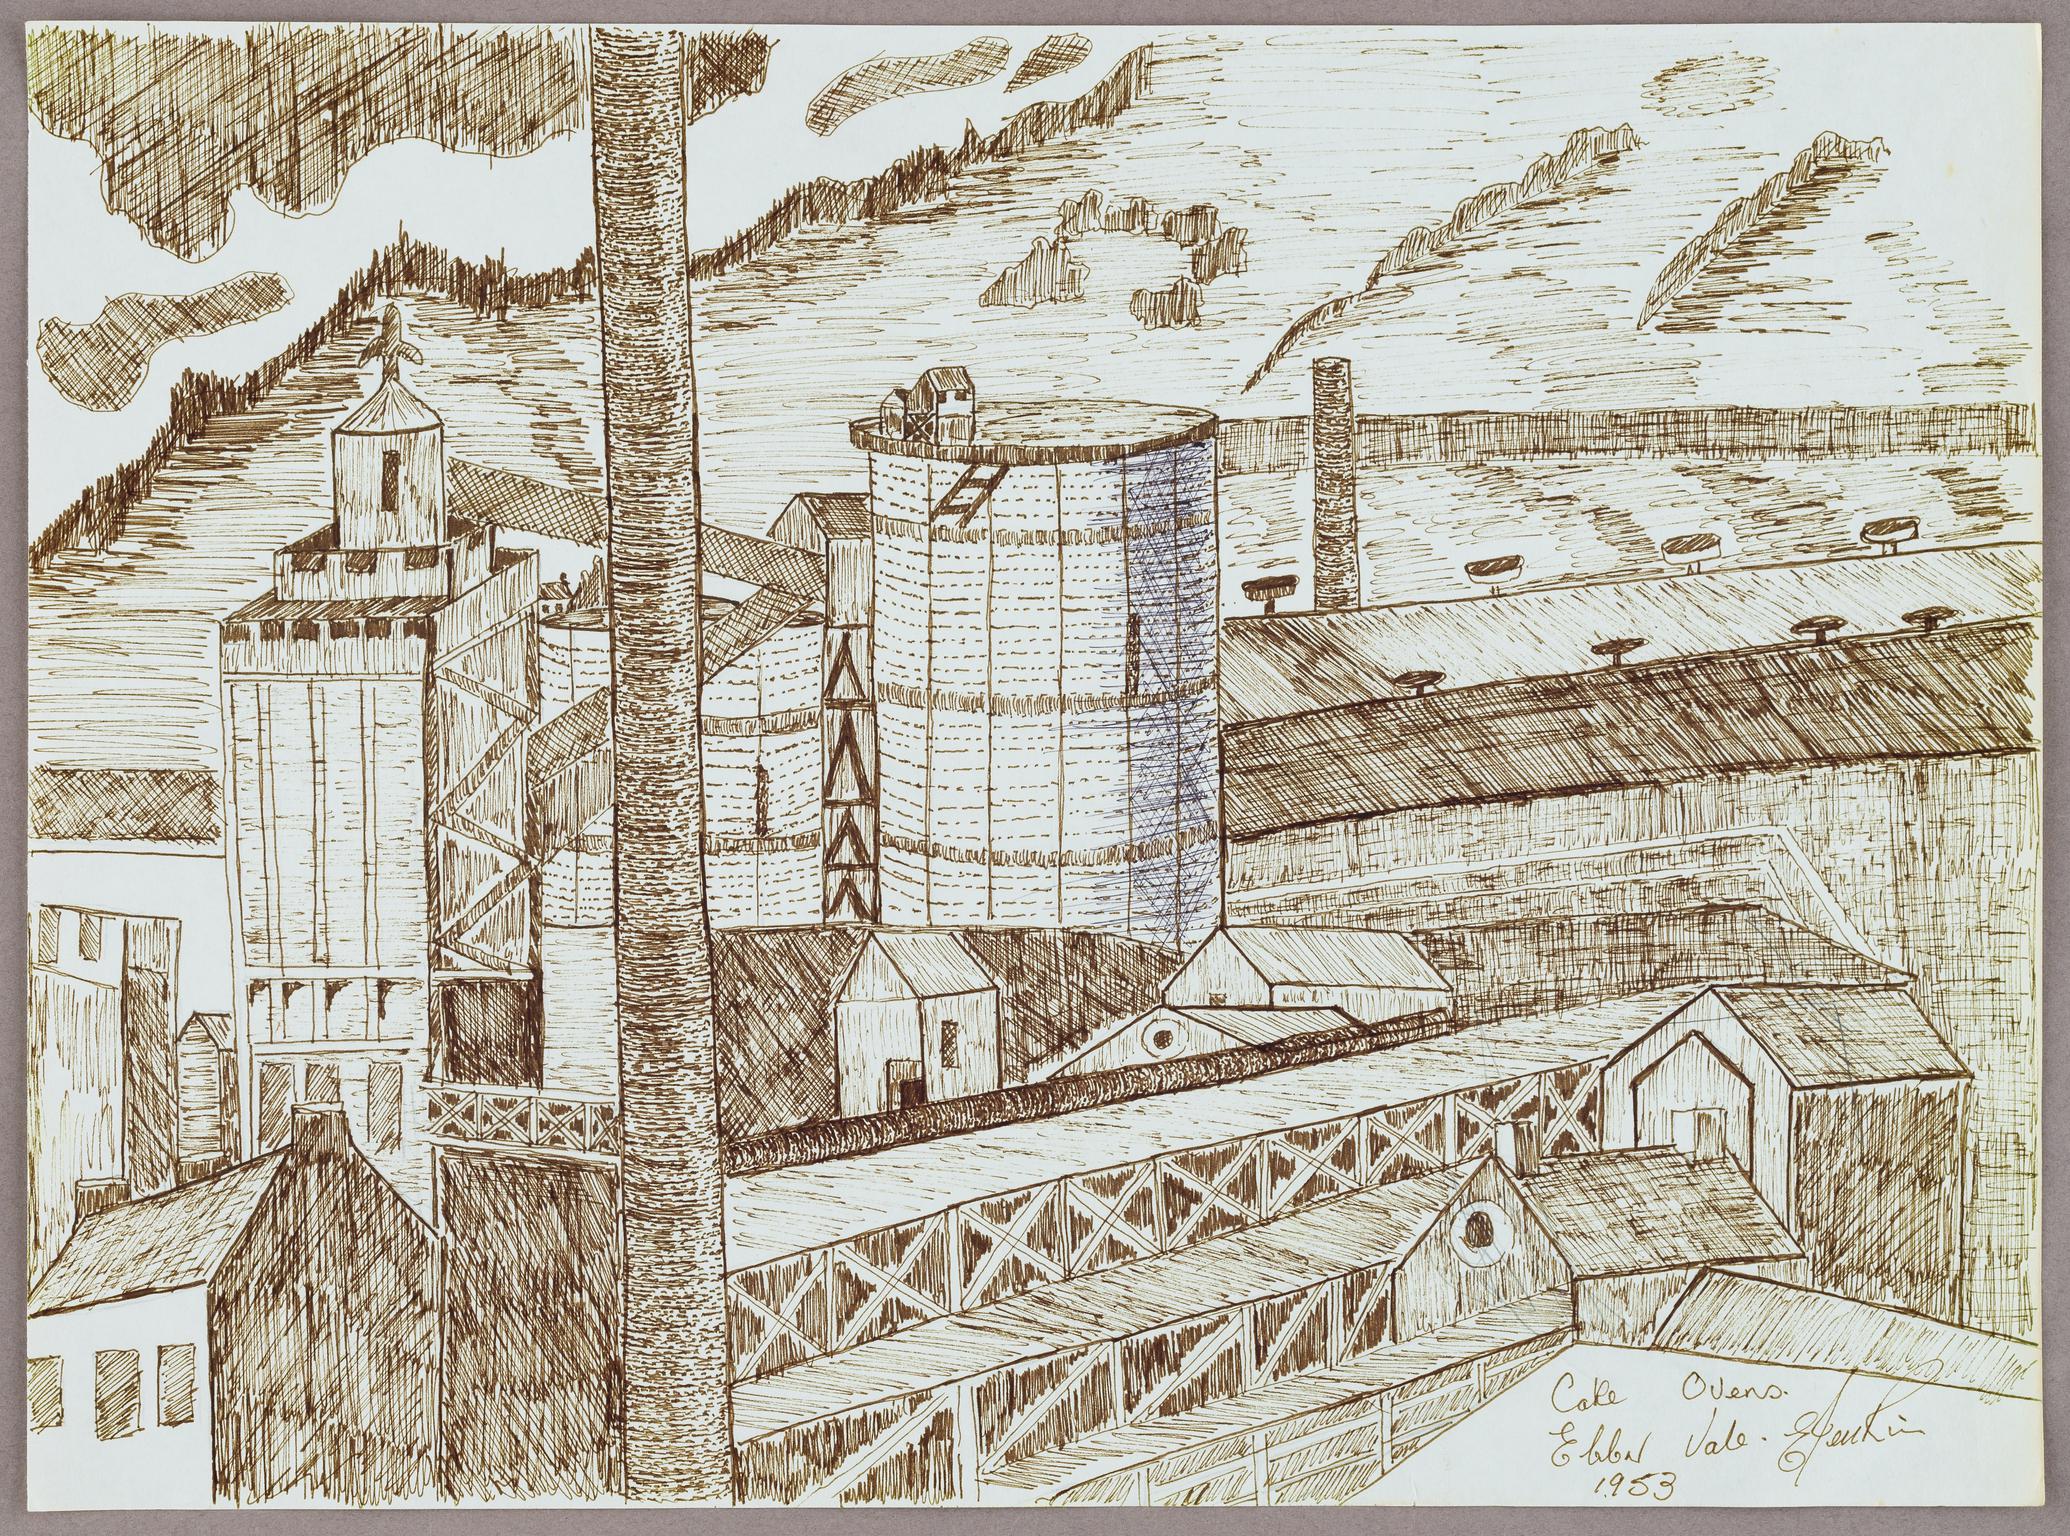 Coke Ovens Ebbw Vale 1953 (drawing)